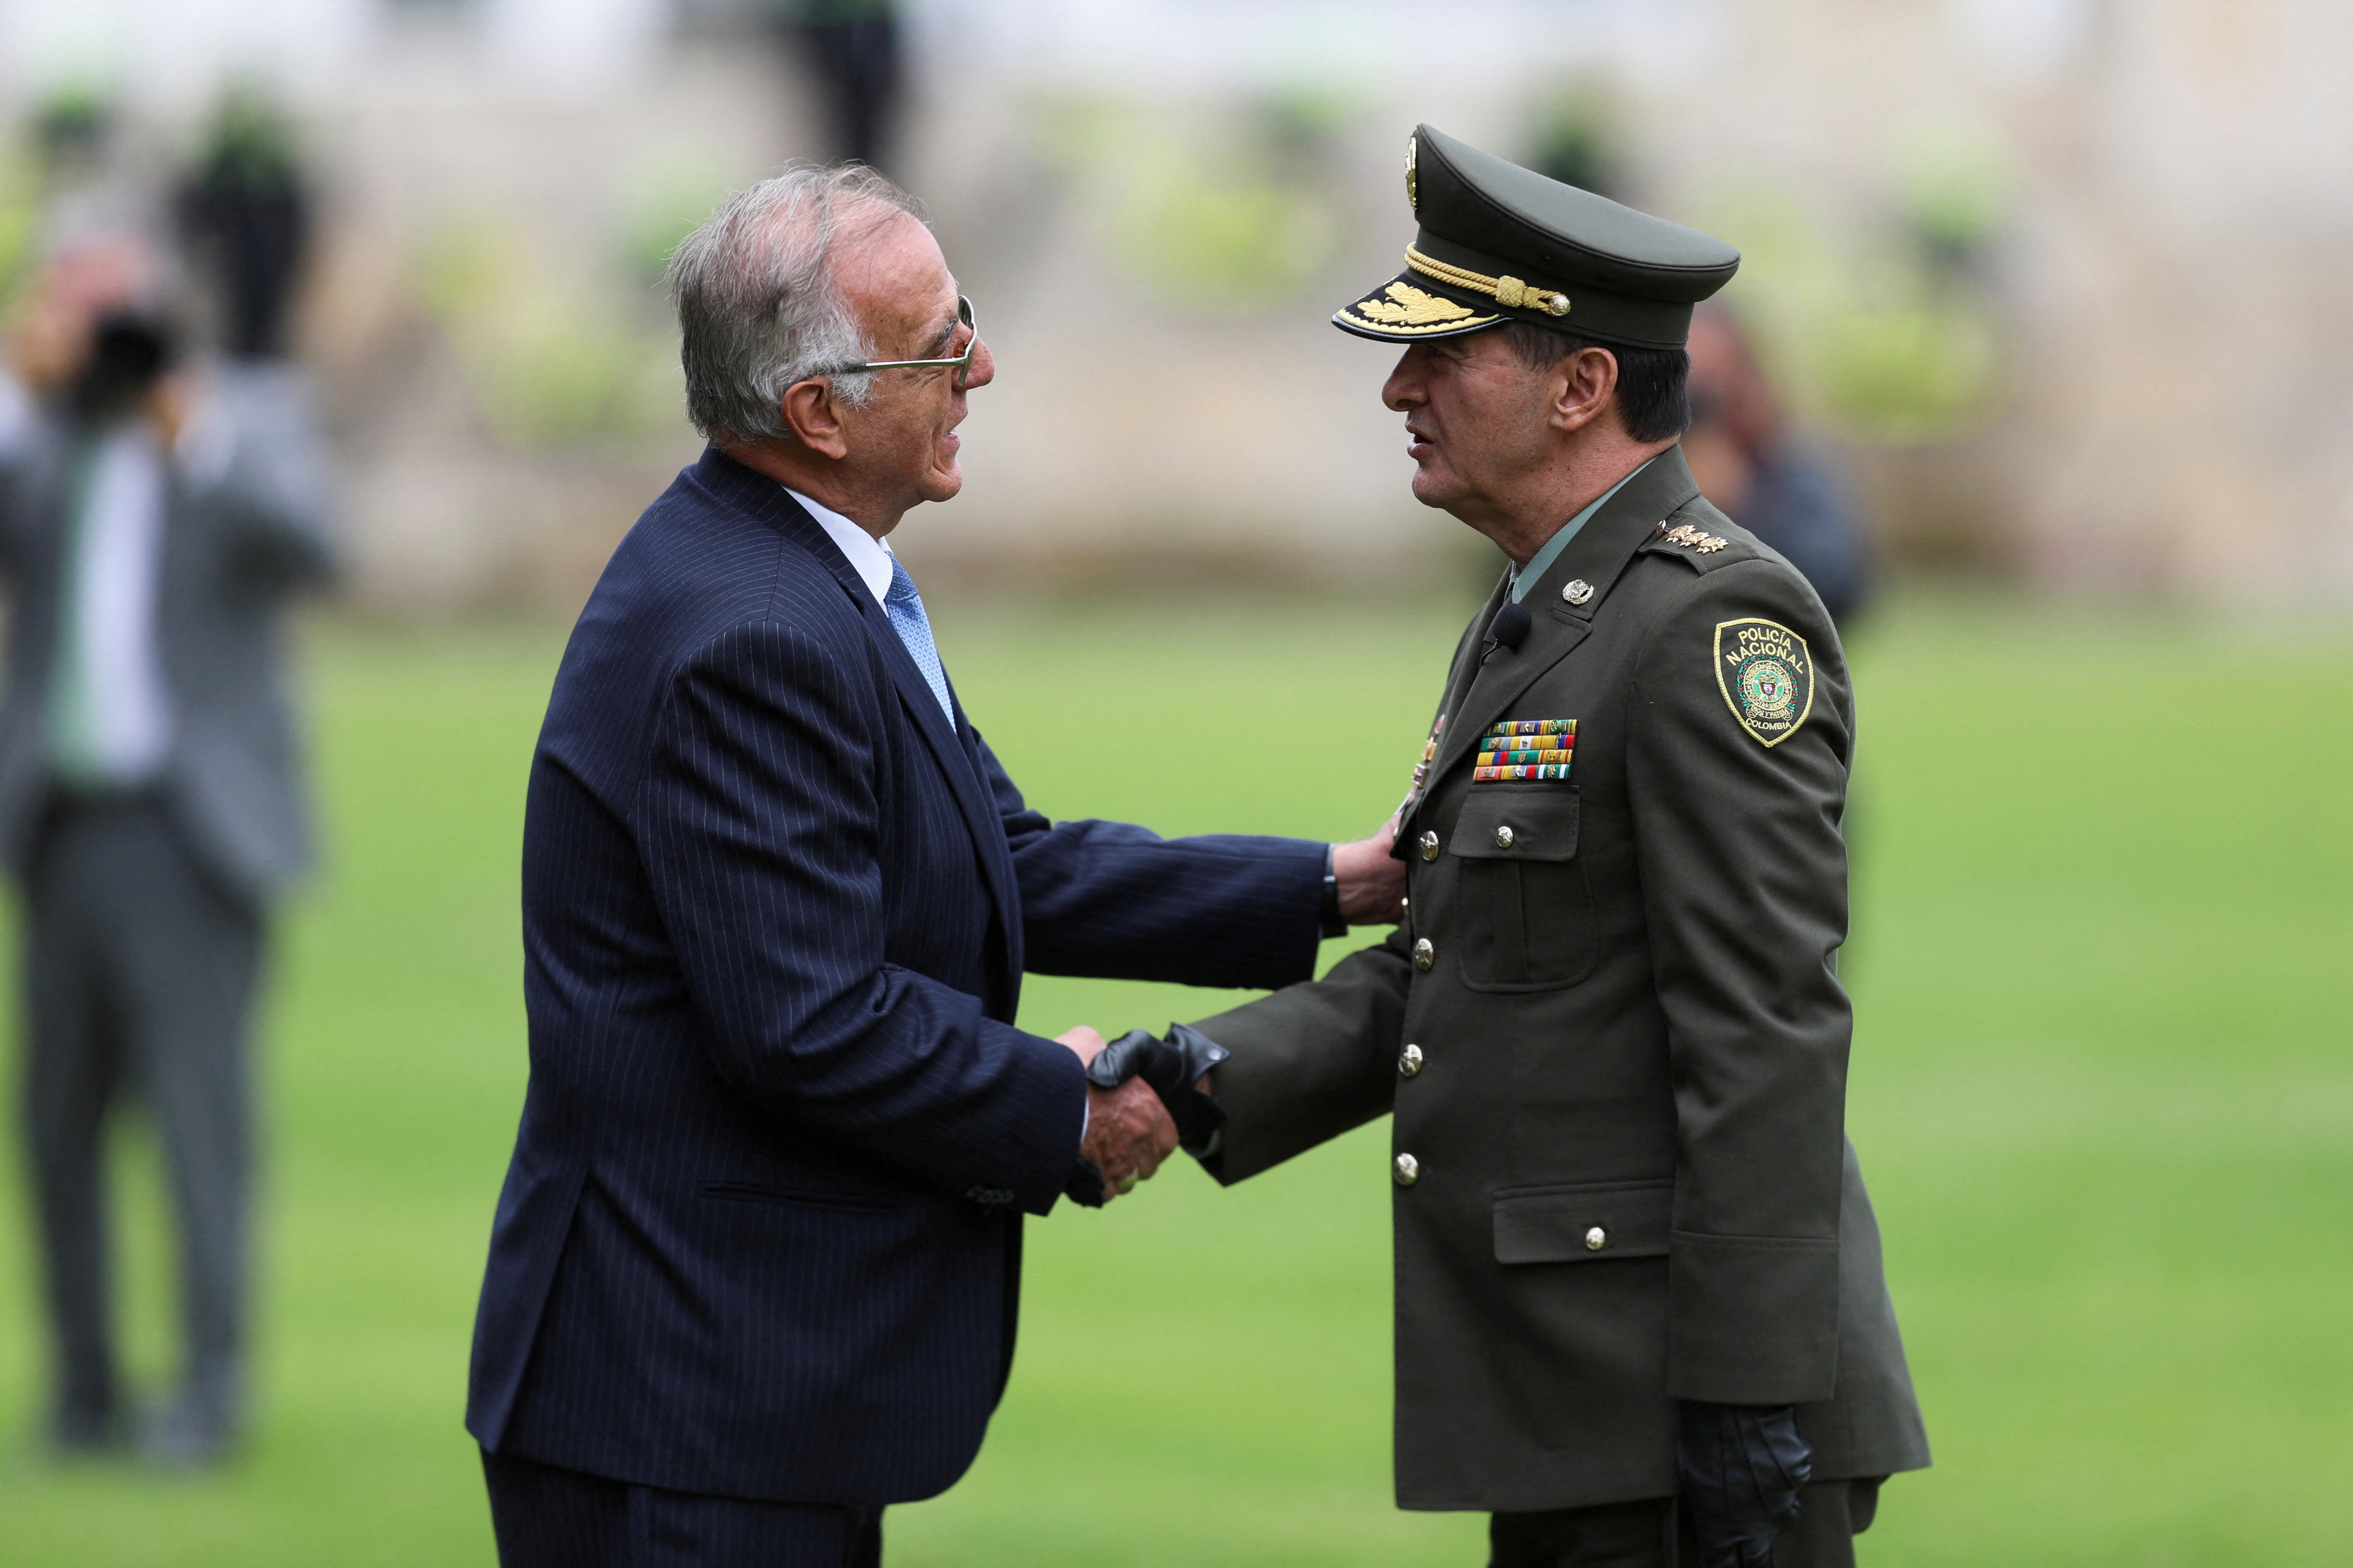 Colombia's Defense Minister Ivan Velasquez shake hands with the new Director of Police, General William Rene Salamanca, at the General Santander Police School in Bogota, Colombia May 9, 2023. REUTERS/Luisa Gonzalez